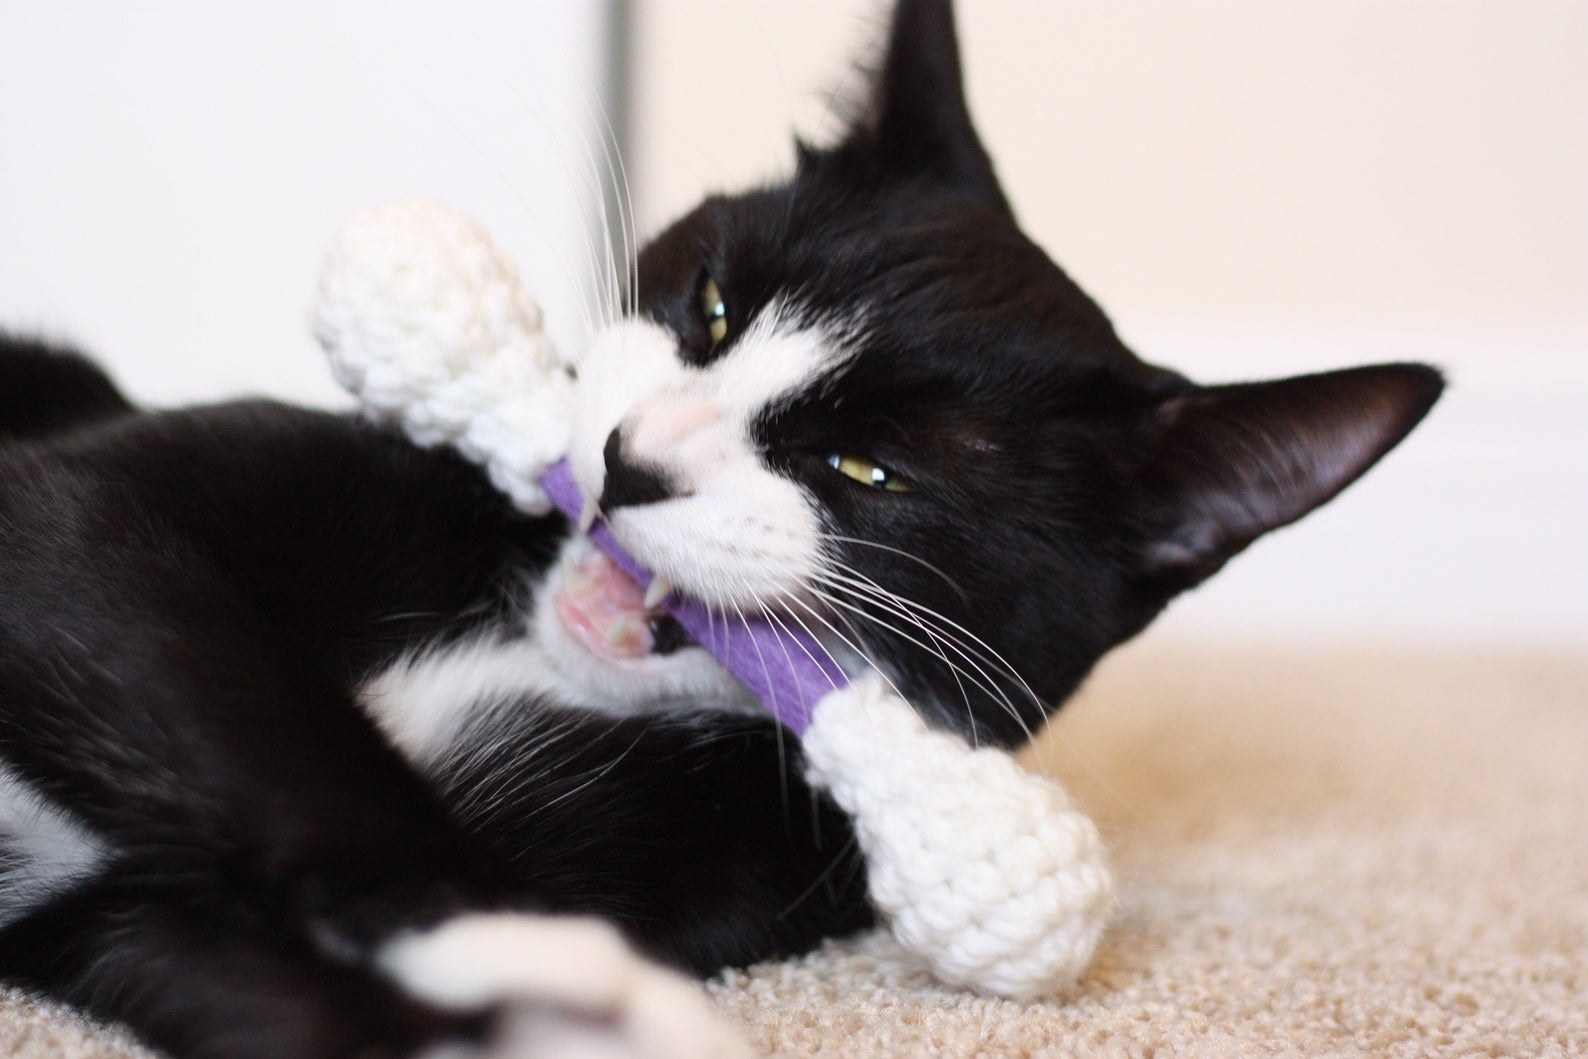 a tuxedo cat playing with a purple knit q-tip toy